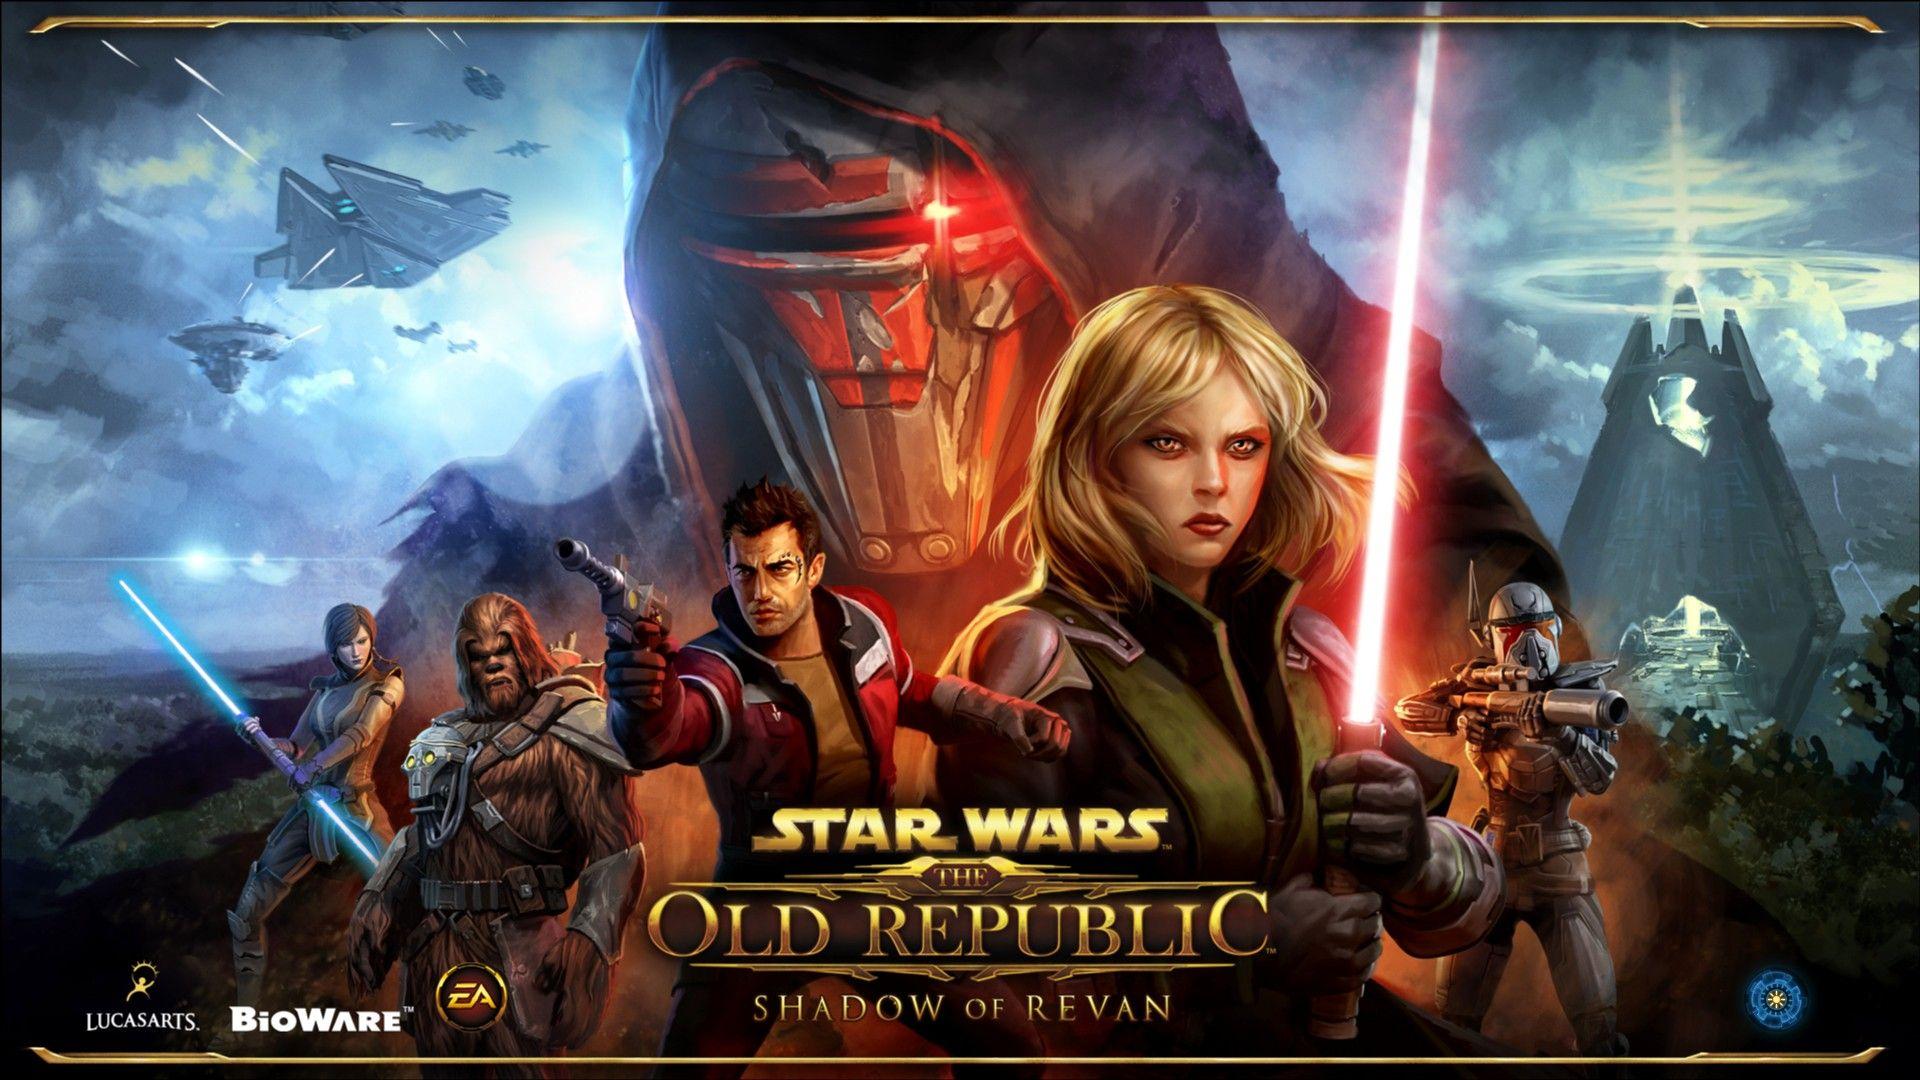 Star Wars: The Old Republic Wallpapers, Pictures, Image